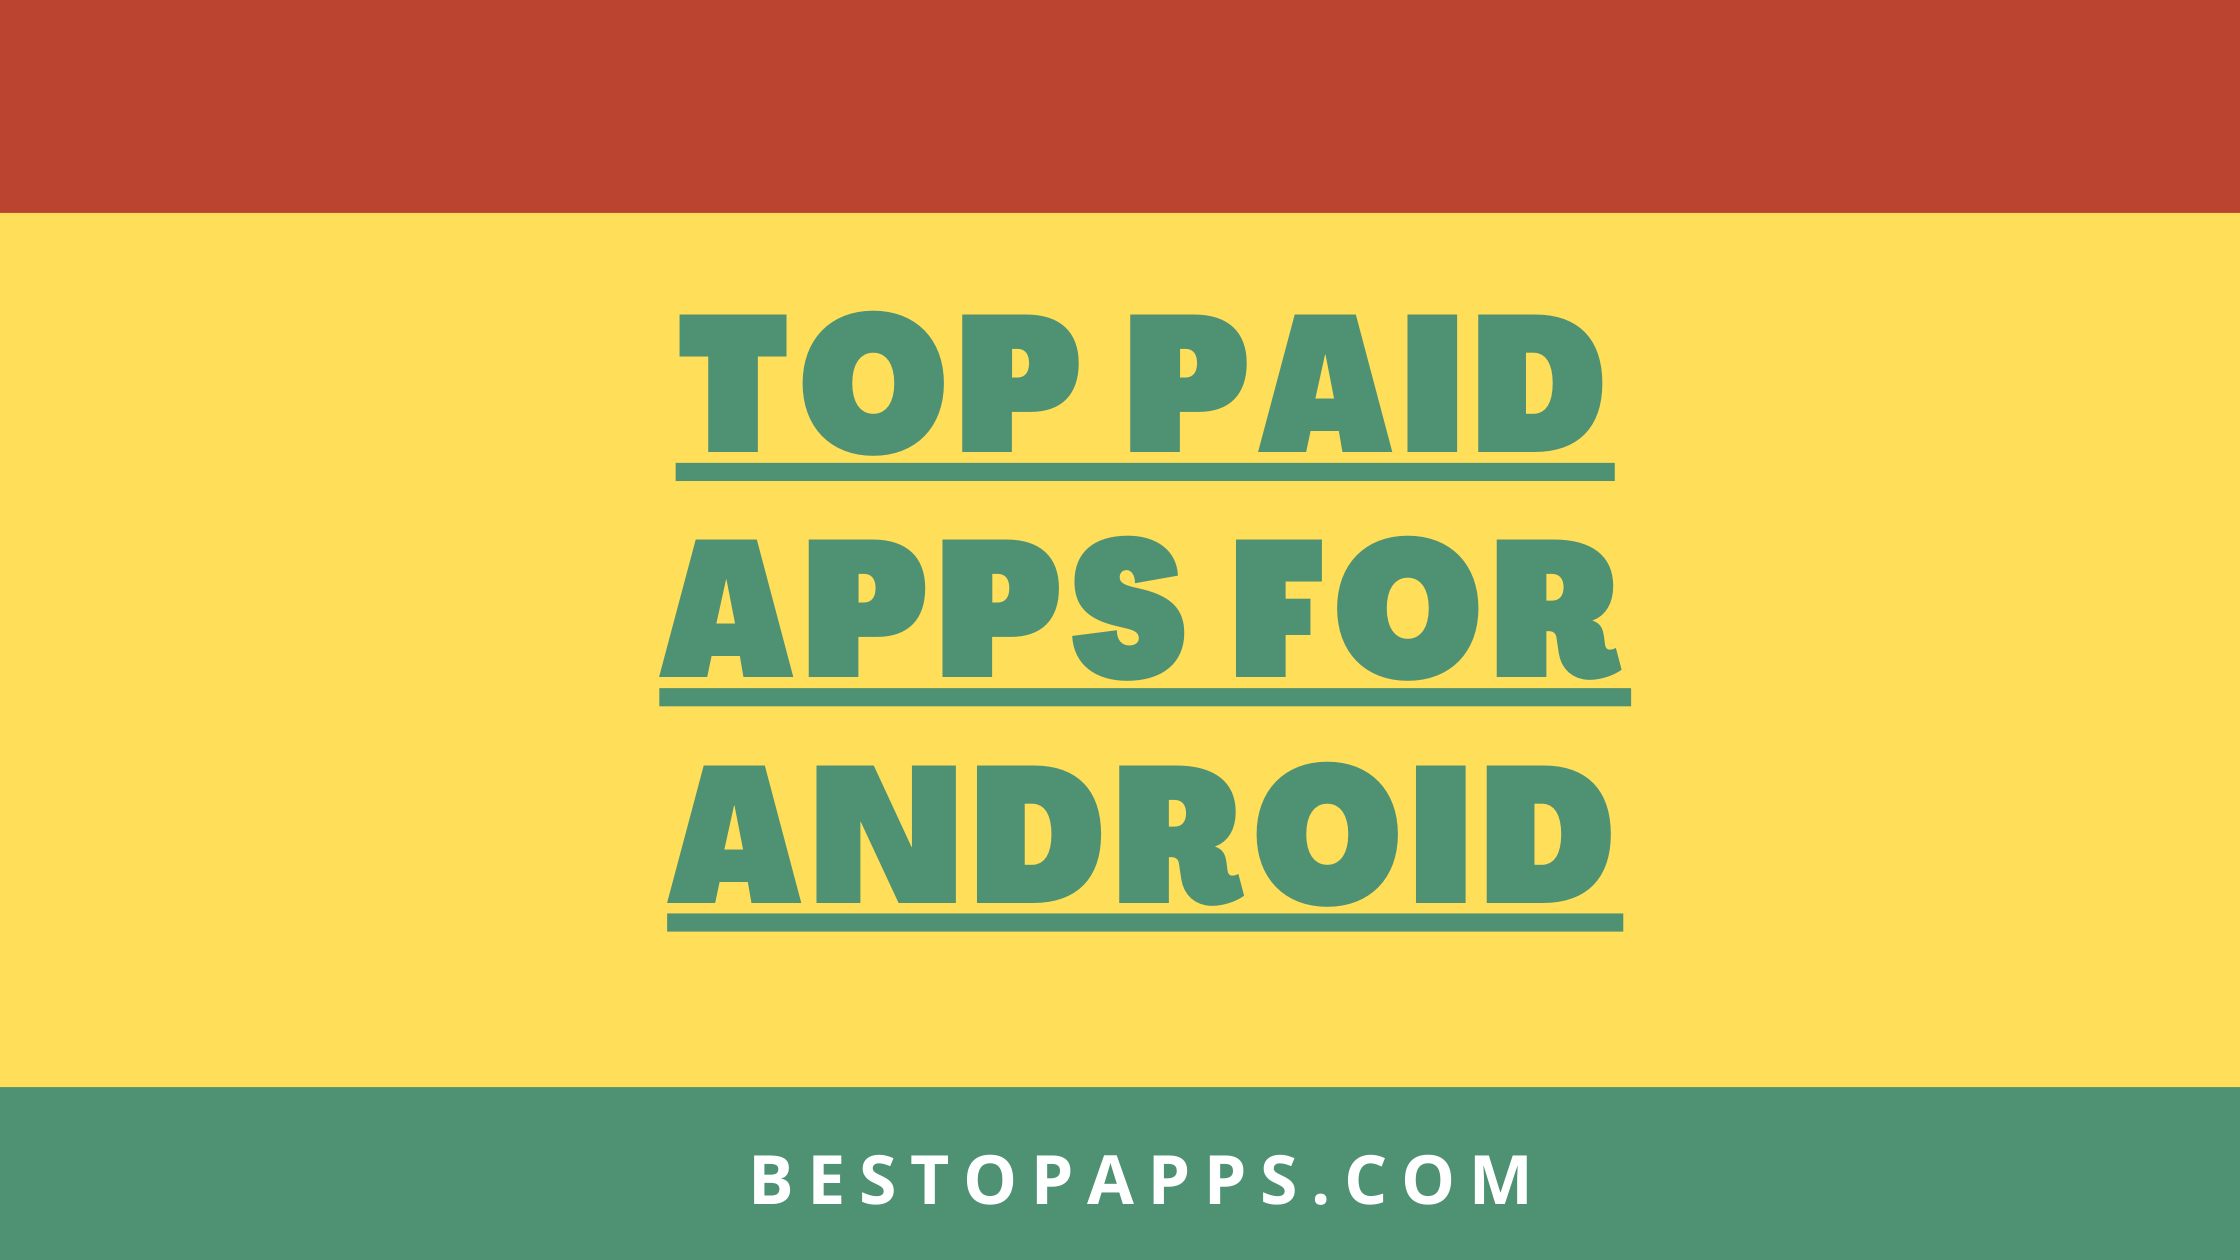 TOP PAID APPS FOR ANDROID